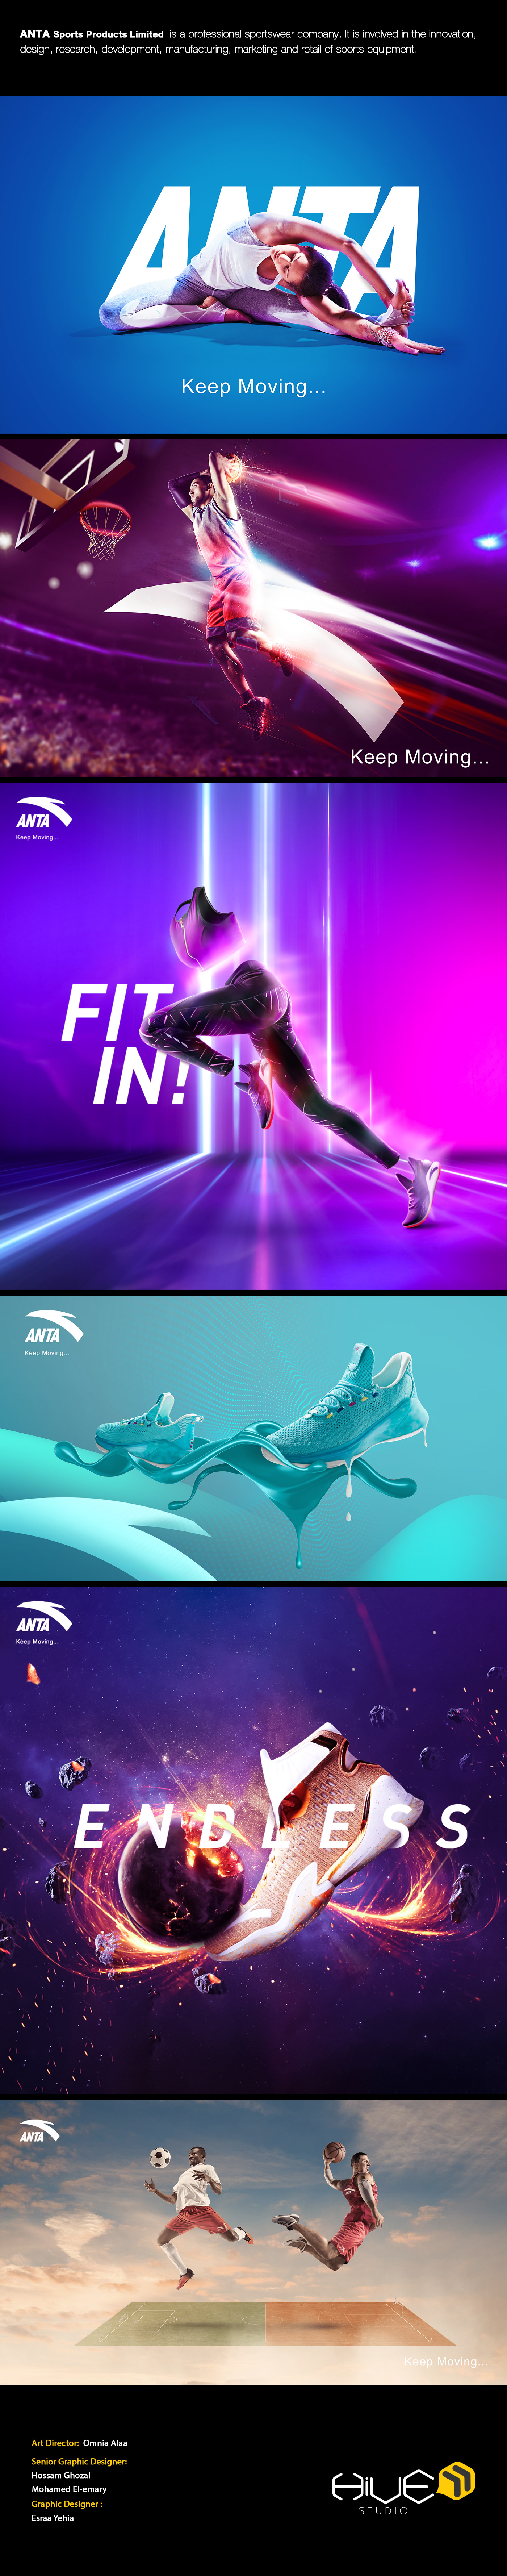 Anta campaign graphic design  manipulation MOVING outfit social media sport wears sports visual design